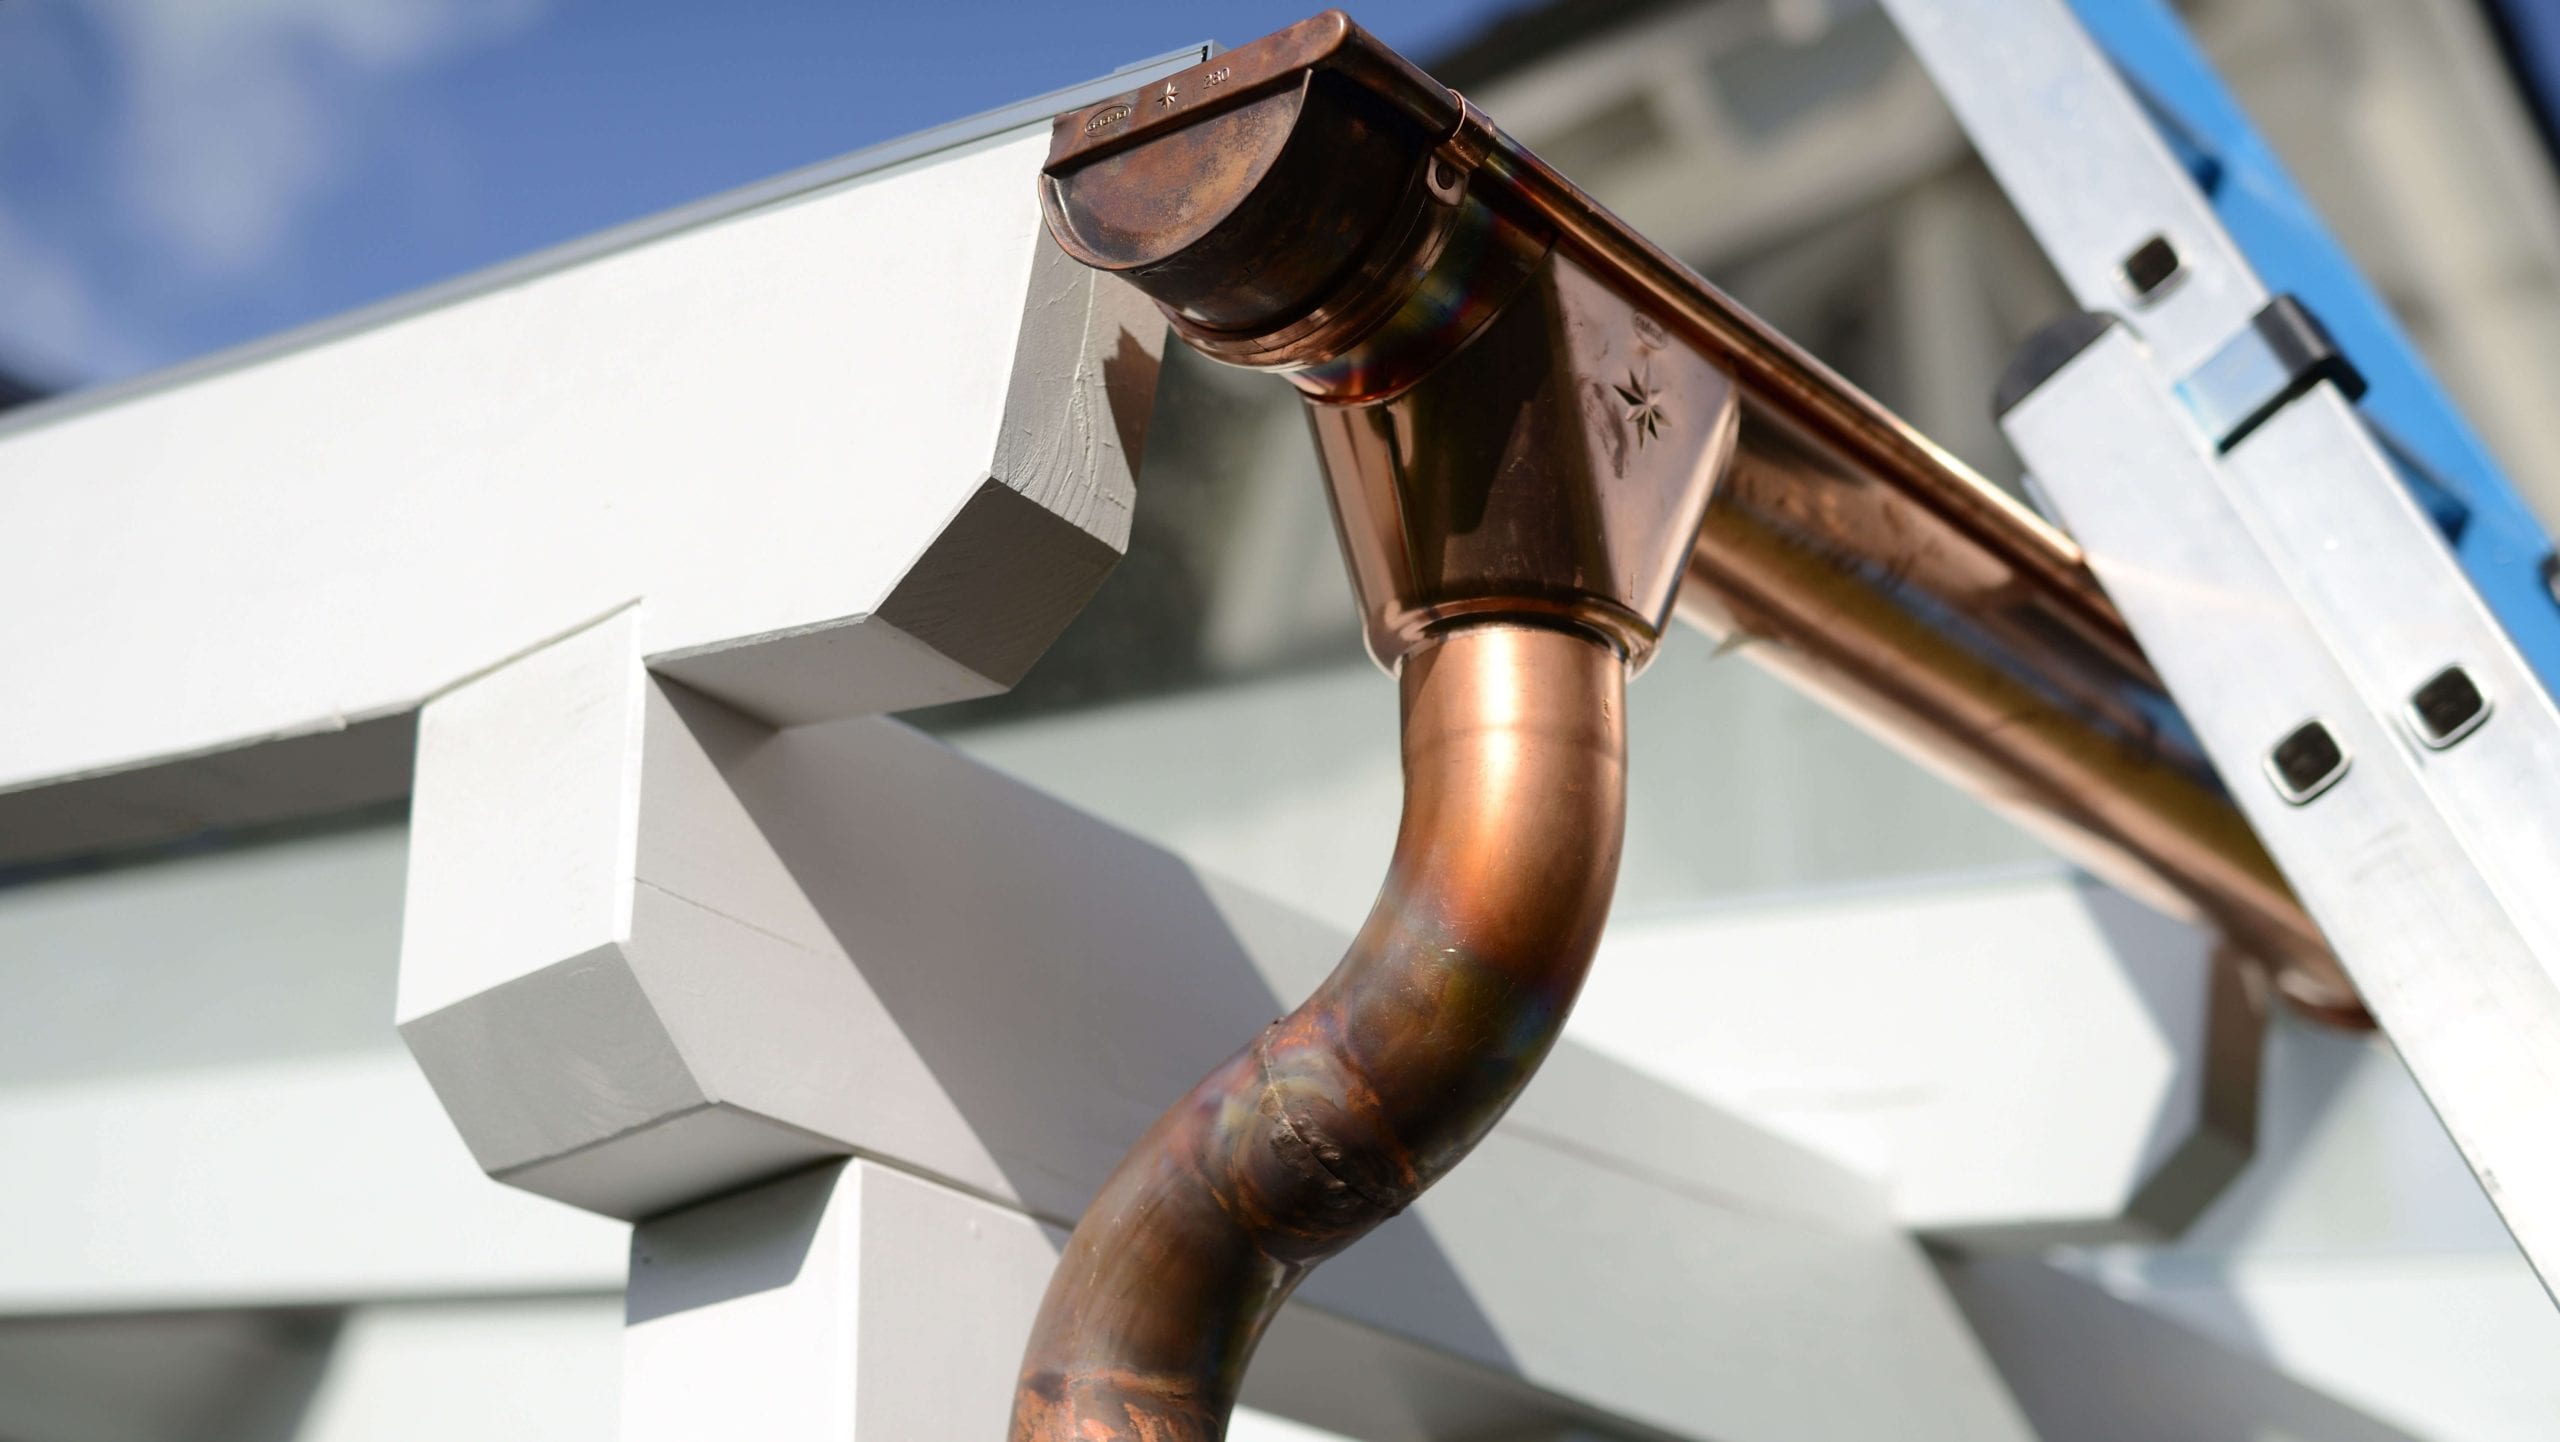 Make your property stand out with copper gutters. Contact for gutter installation in Marietta